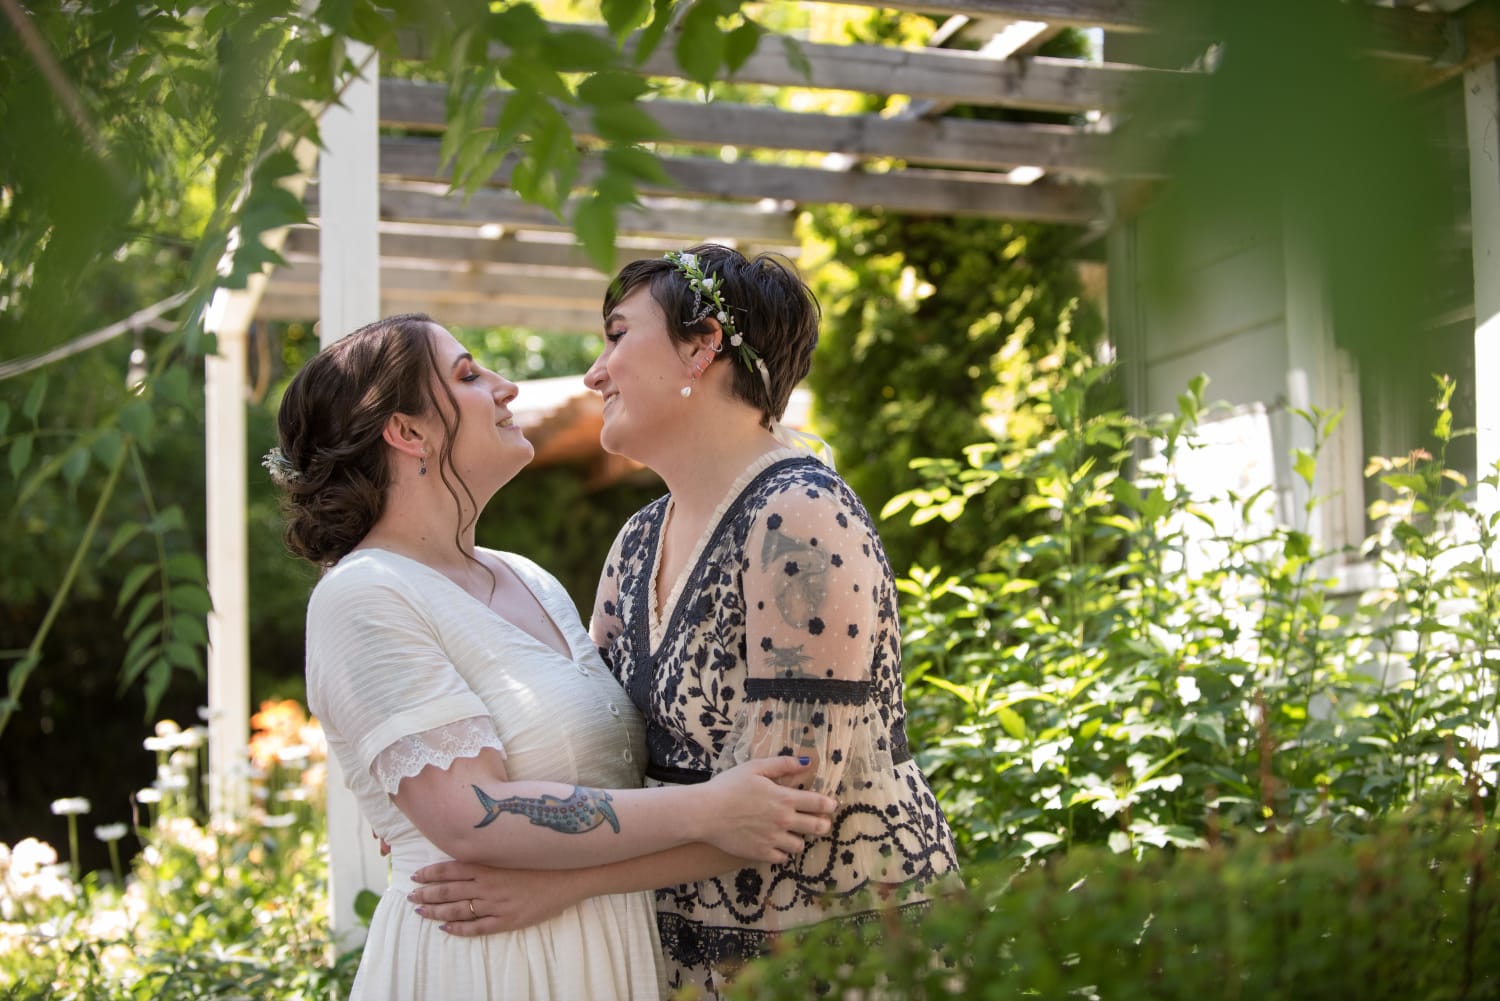 Have a gay wedding photo. As a treat. (Me: r with embroidered dress, NB lesbian; my wife: in white dress, bi)